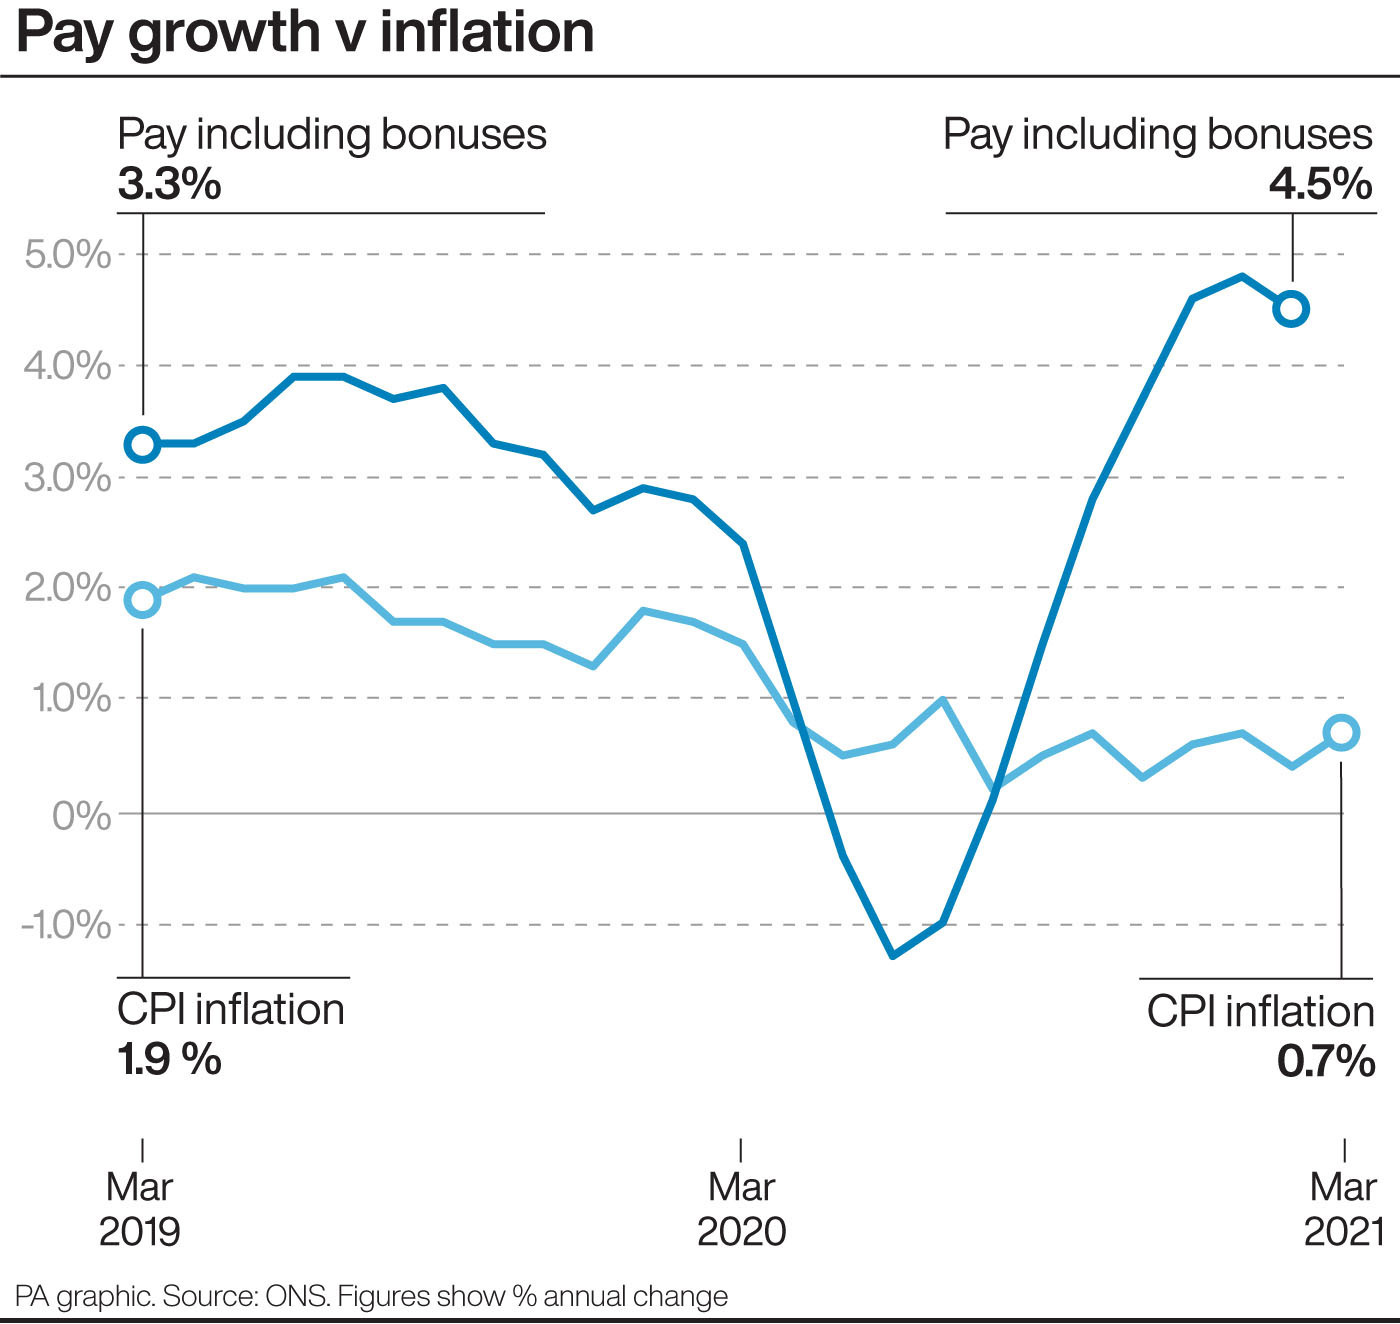 Pay growth v inflation. Infographic PA Graphics. 